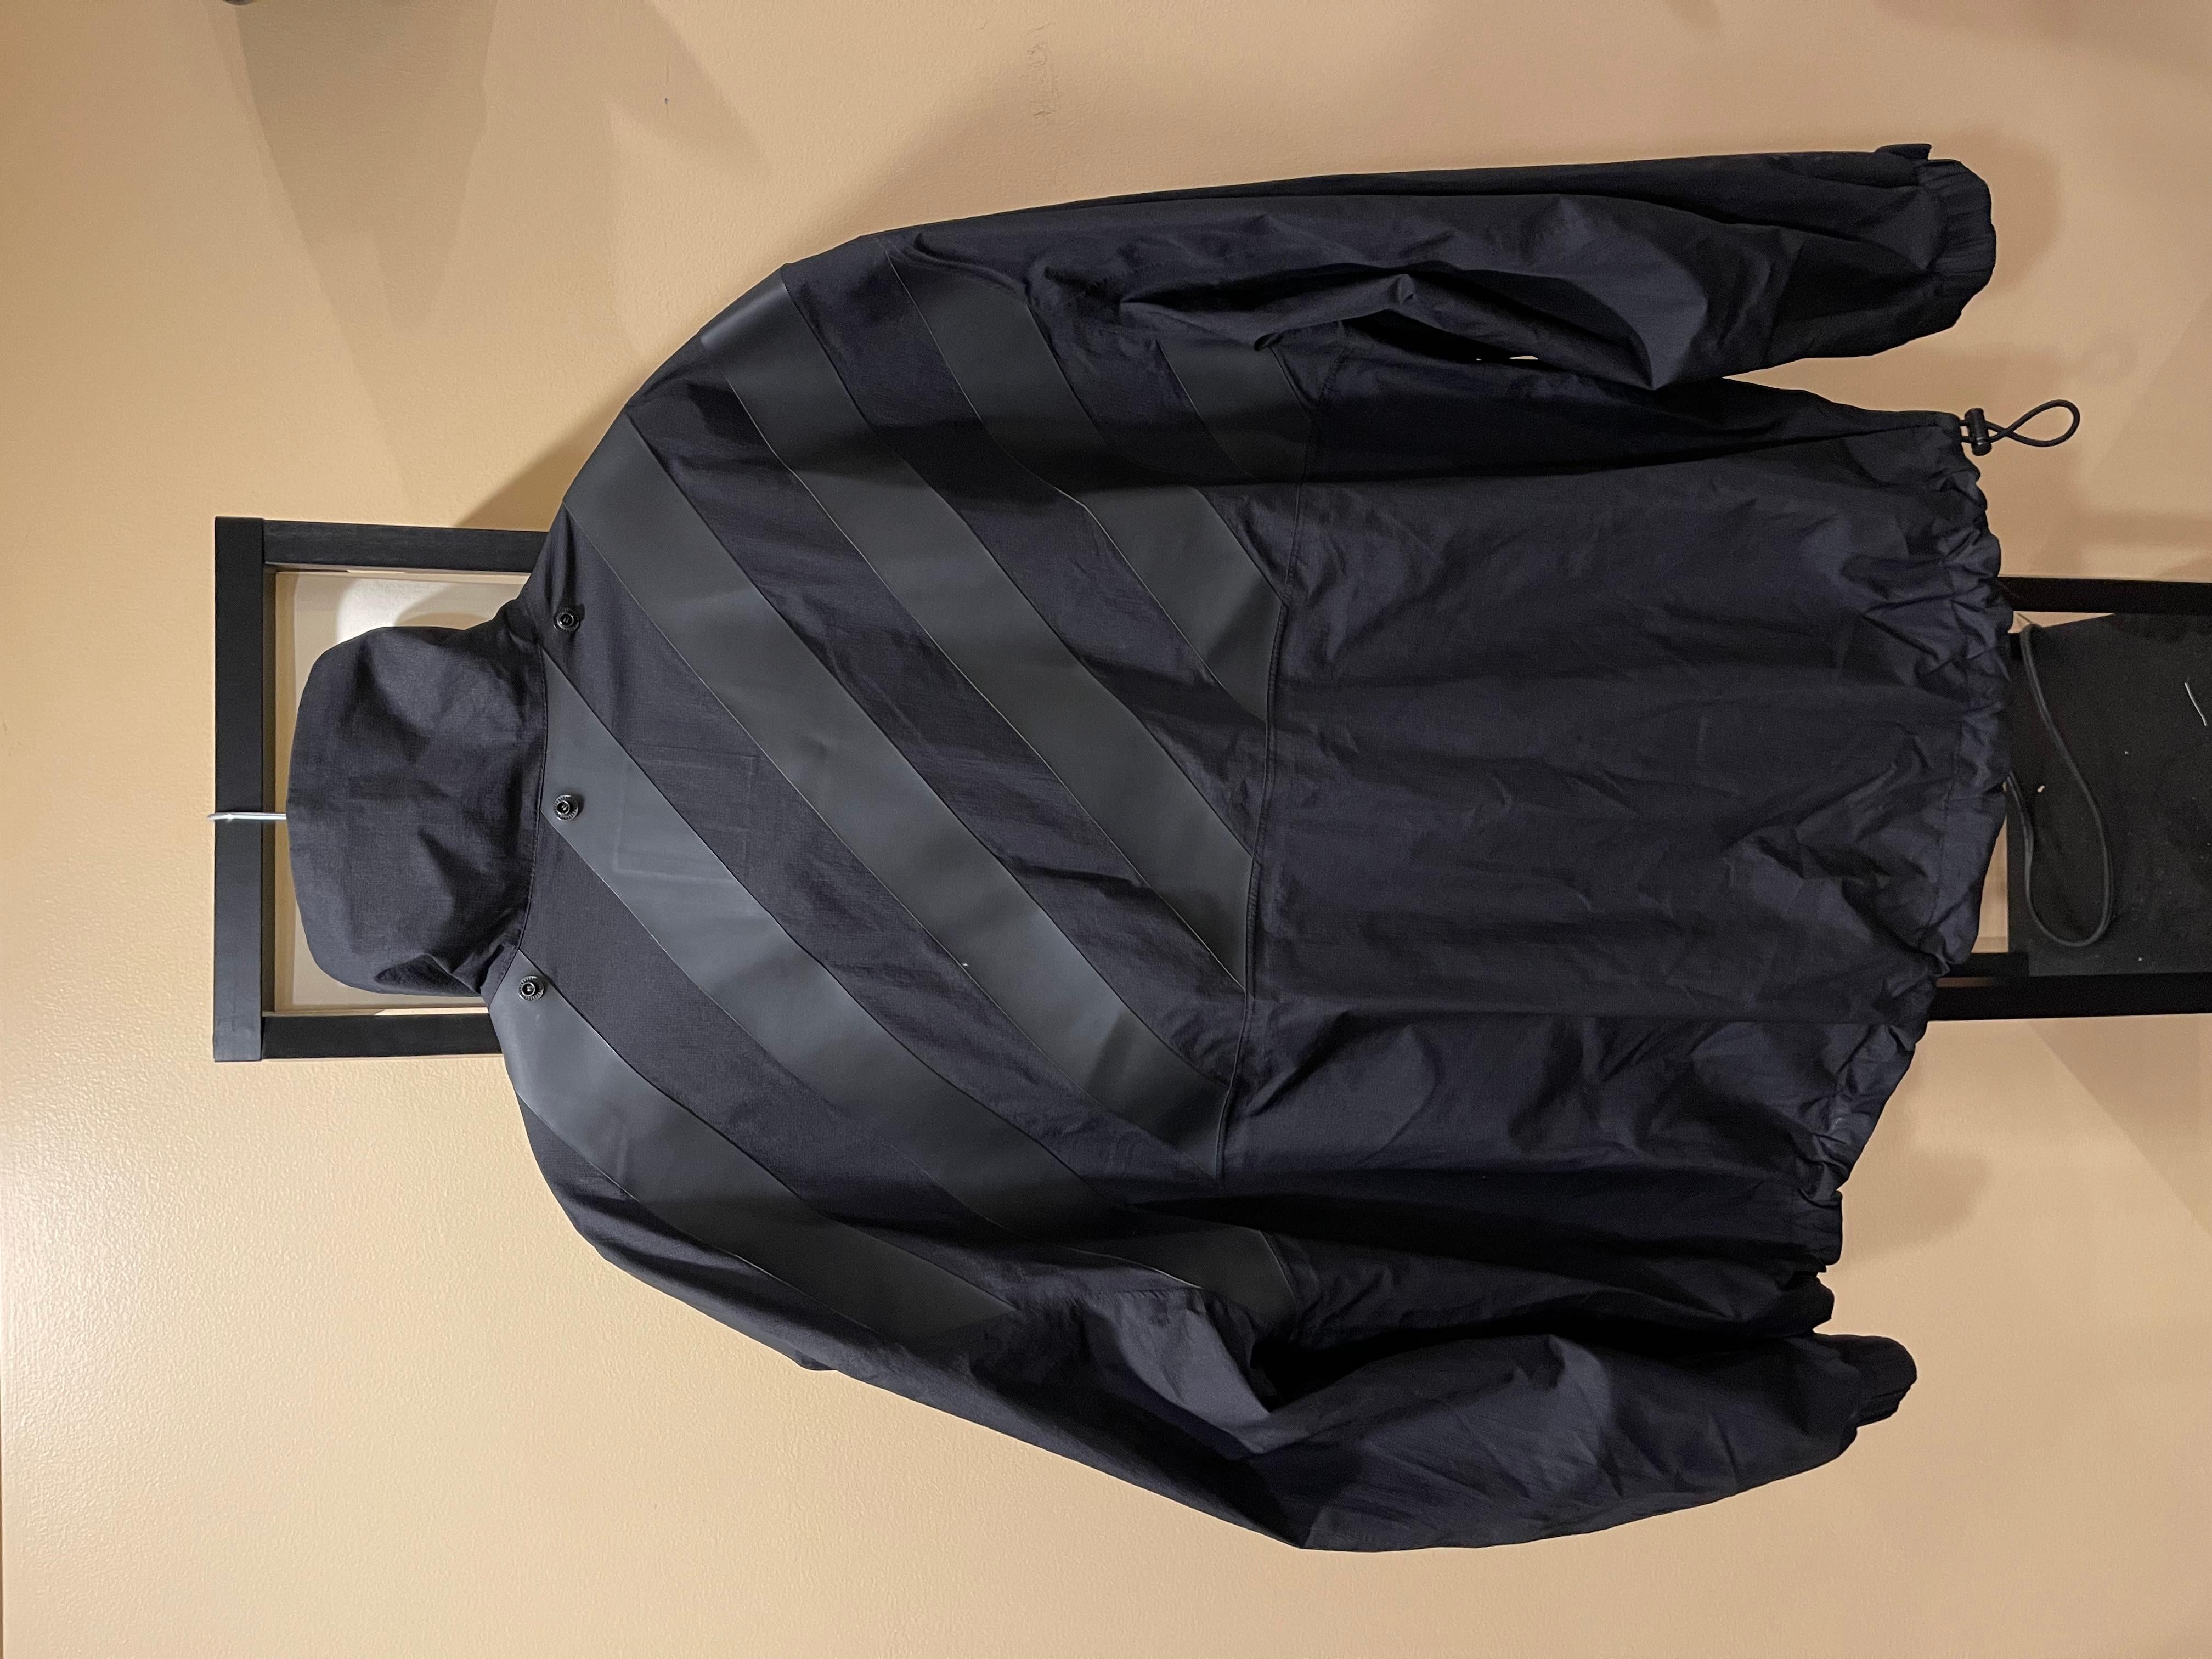 Moncler x Off White Donville Smock Black Windbreaker Jacket In Good Condition For Sale In Bear, DE